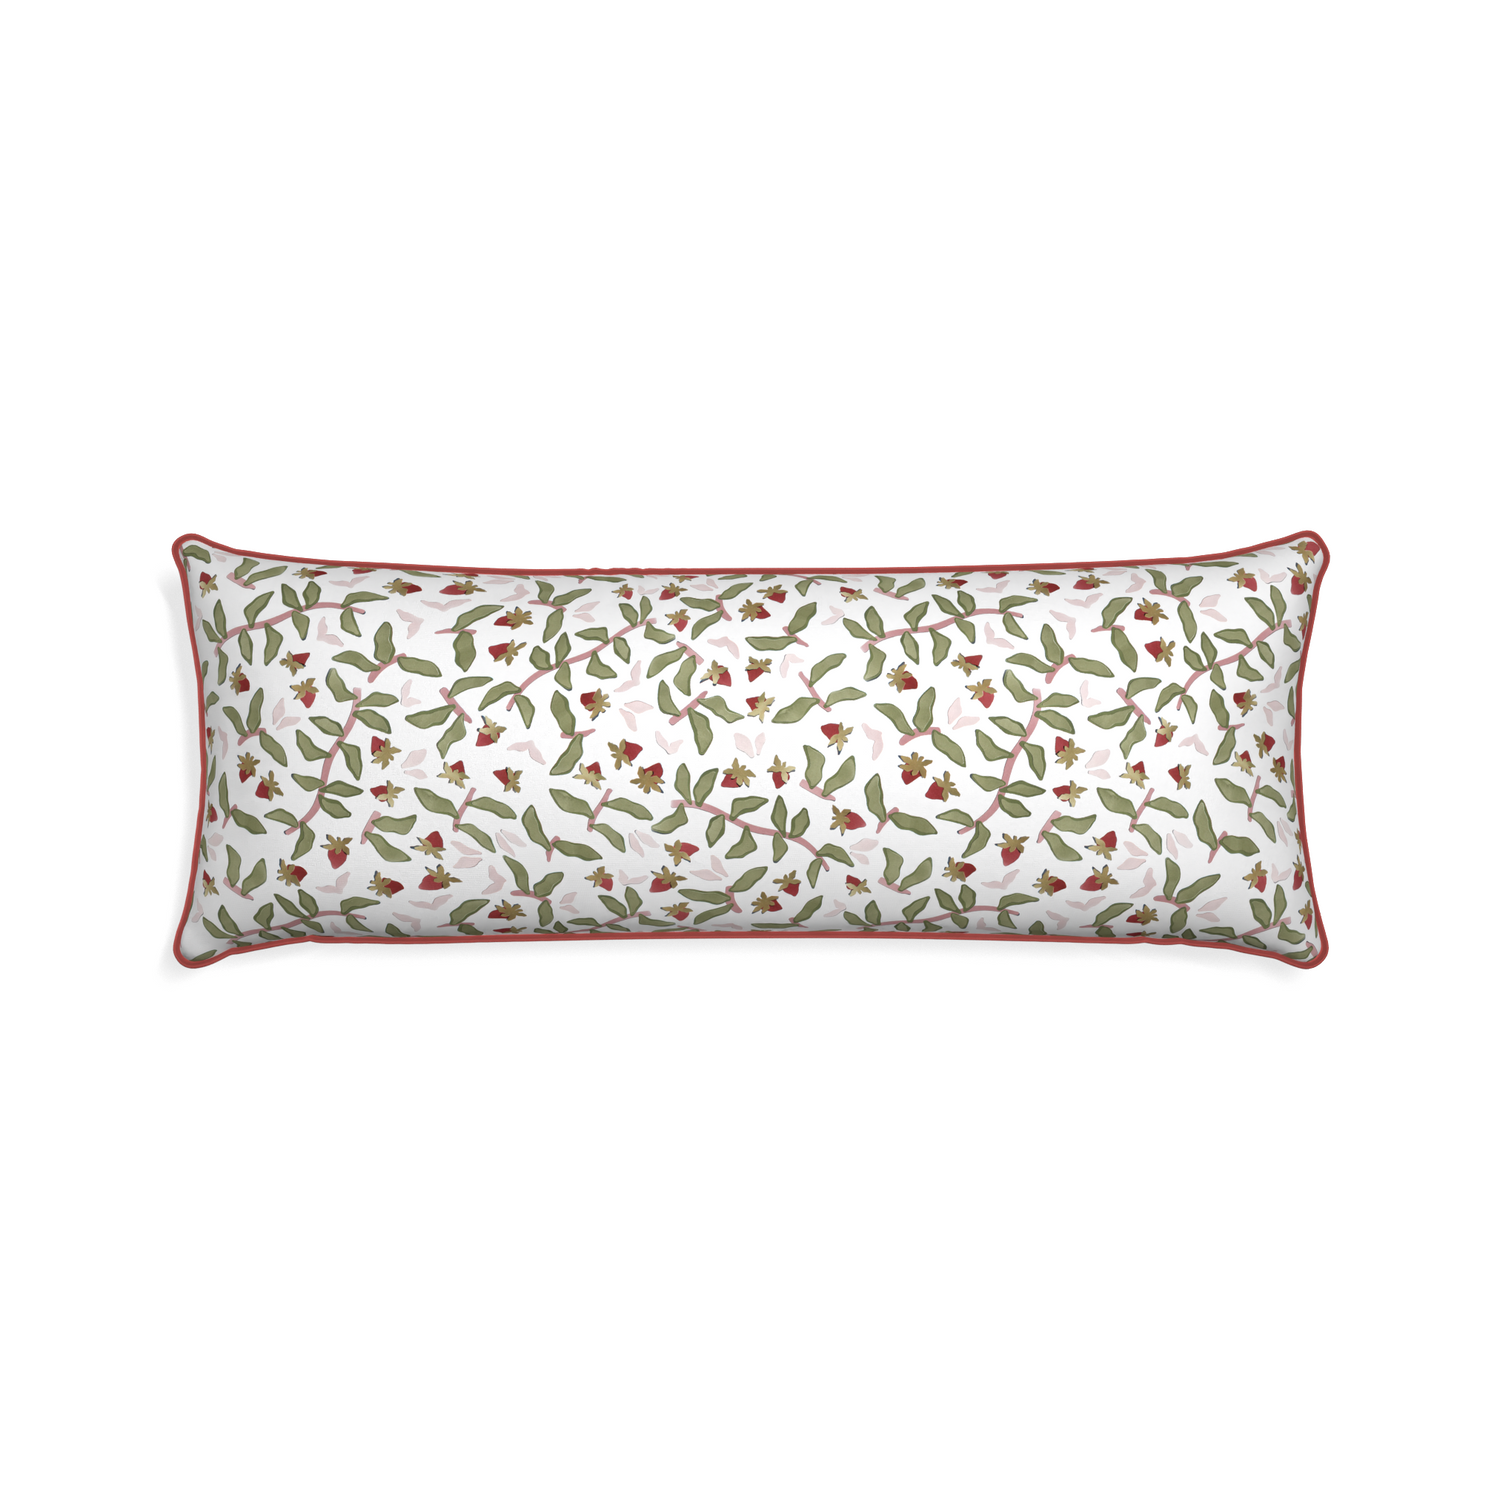 Xl-lumbar nellie custom pillow with c piping on white background